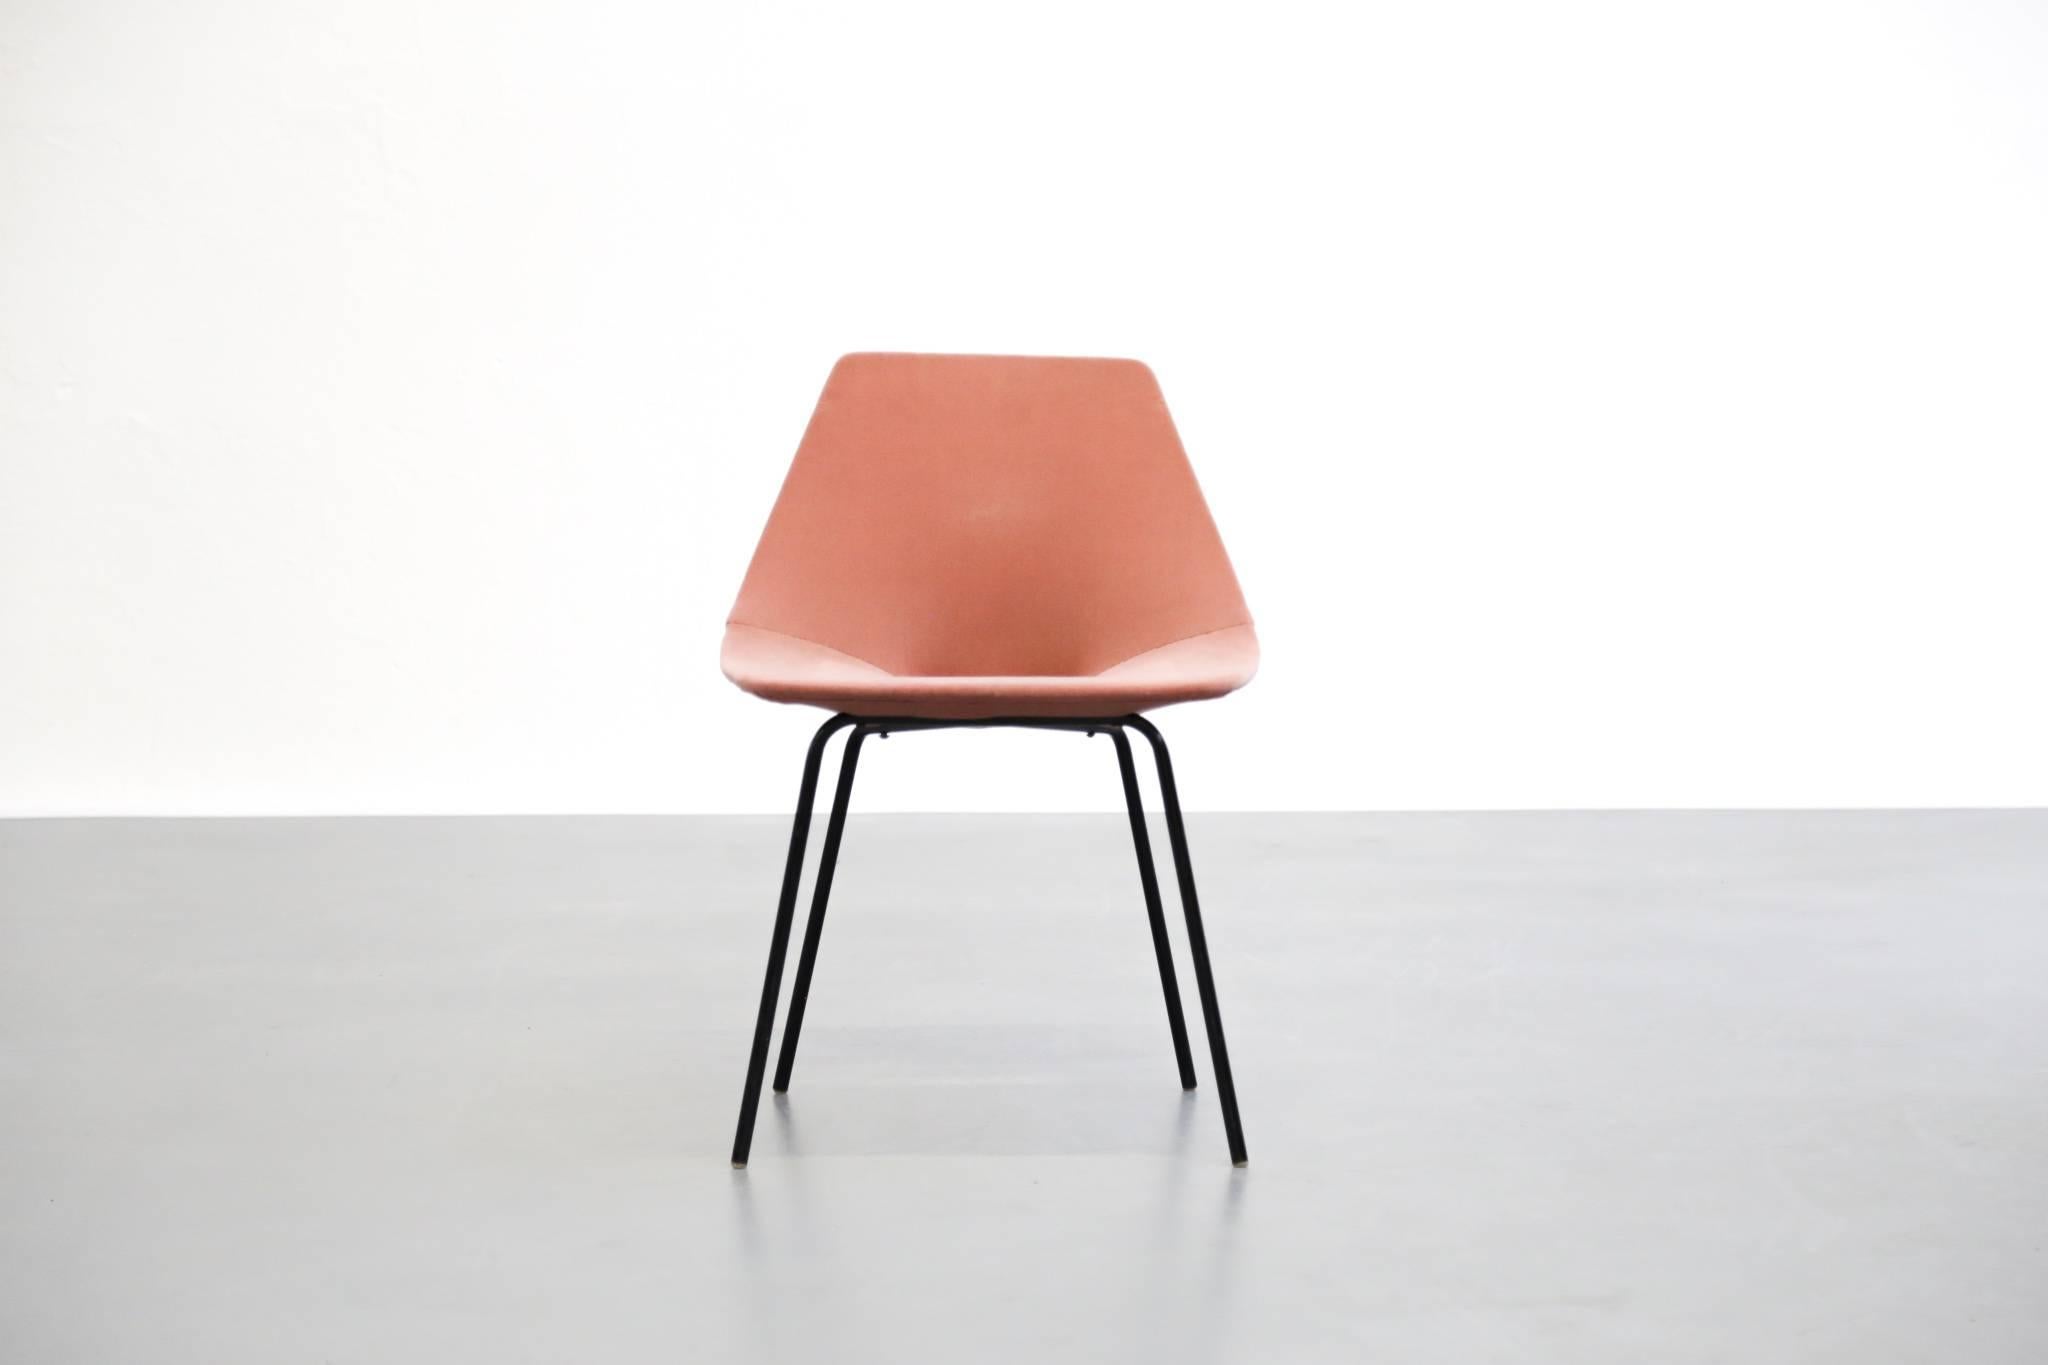 Rare French Tonneau chair by Pierre Guariche for Steiner.
Made of pink velvet.